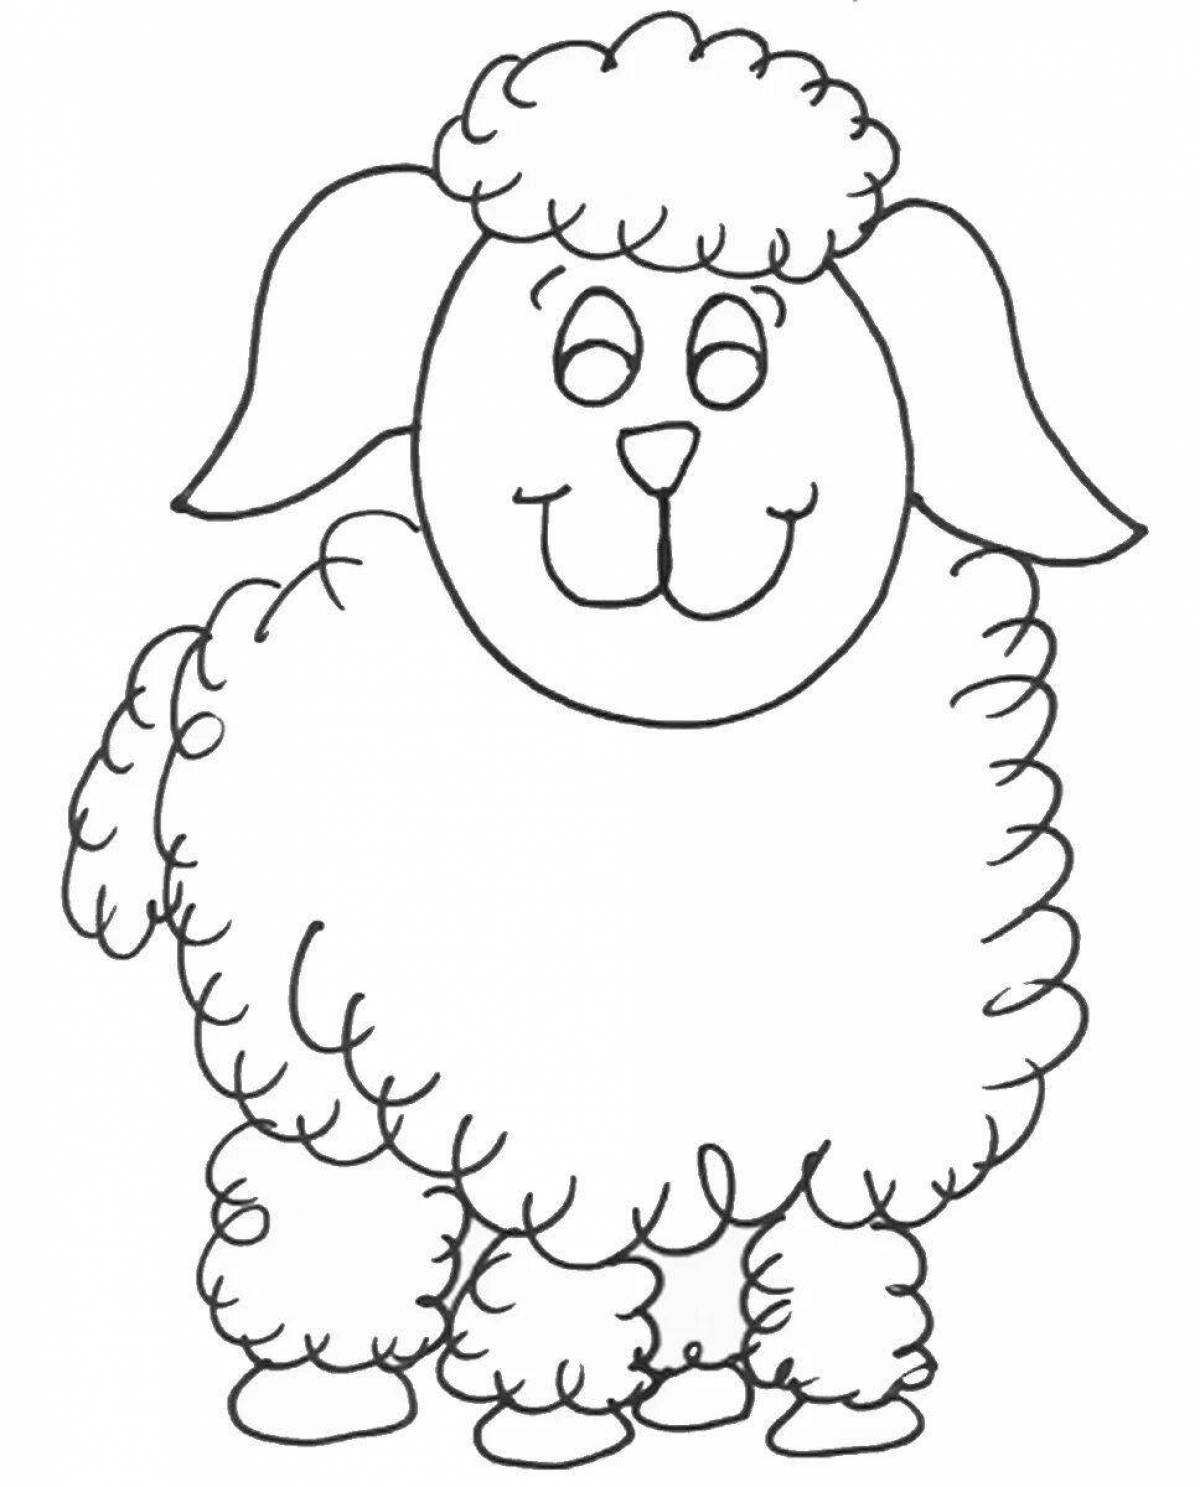 Violent lamb coloring book for 3-4 year olds